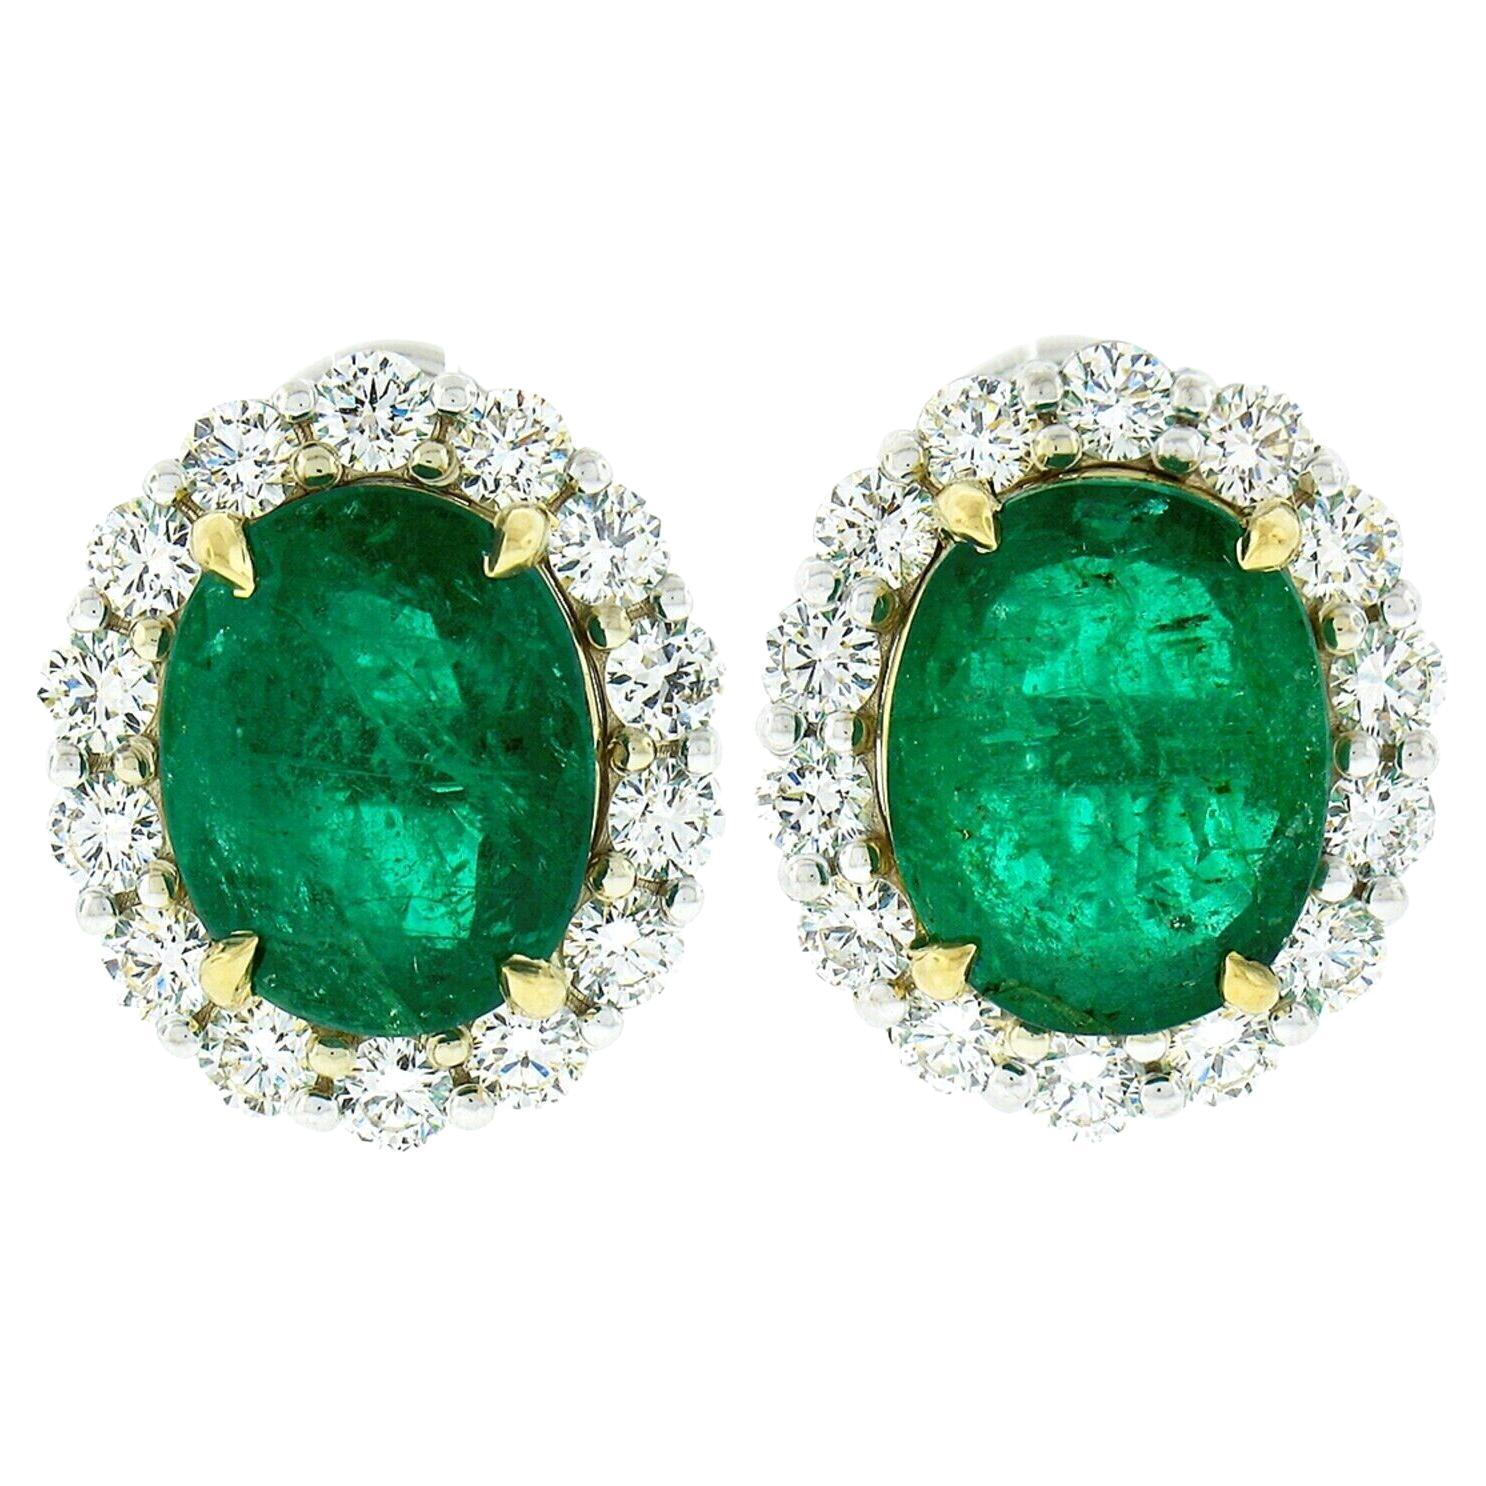 New 18K TT Gold Large 13.04ctw GIA Oval Emerald w/ Round Diamond Halo Earrings For Sale